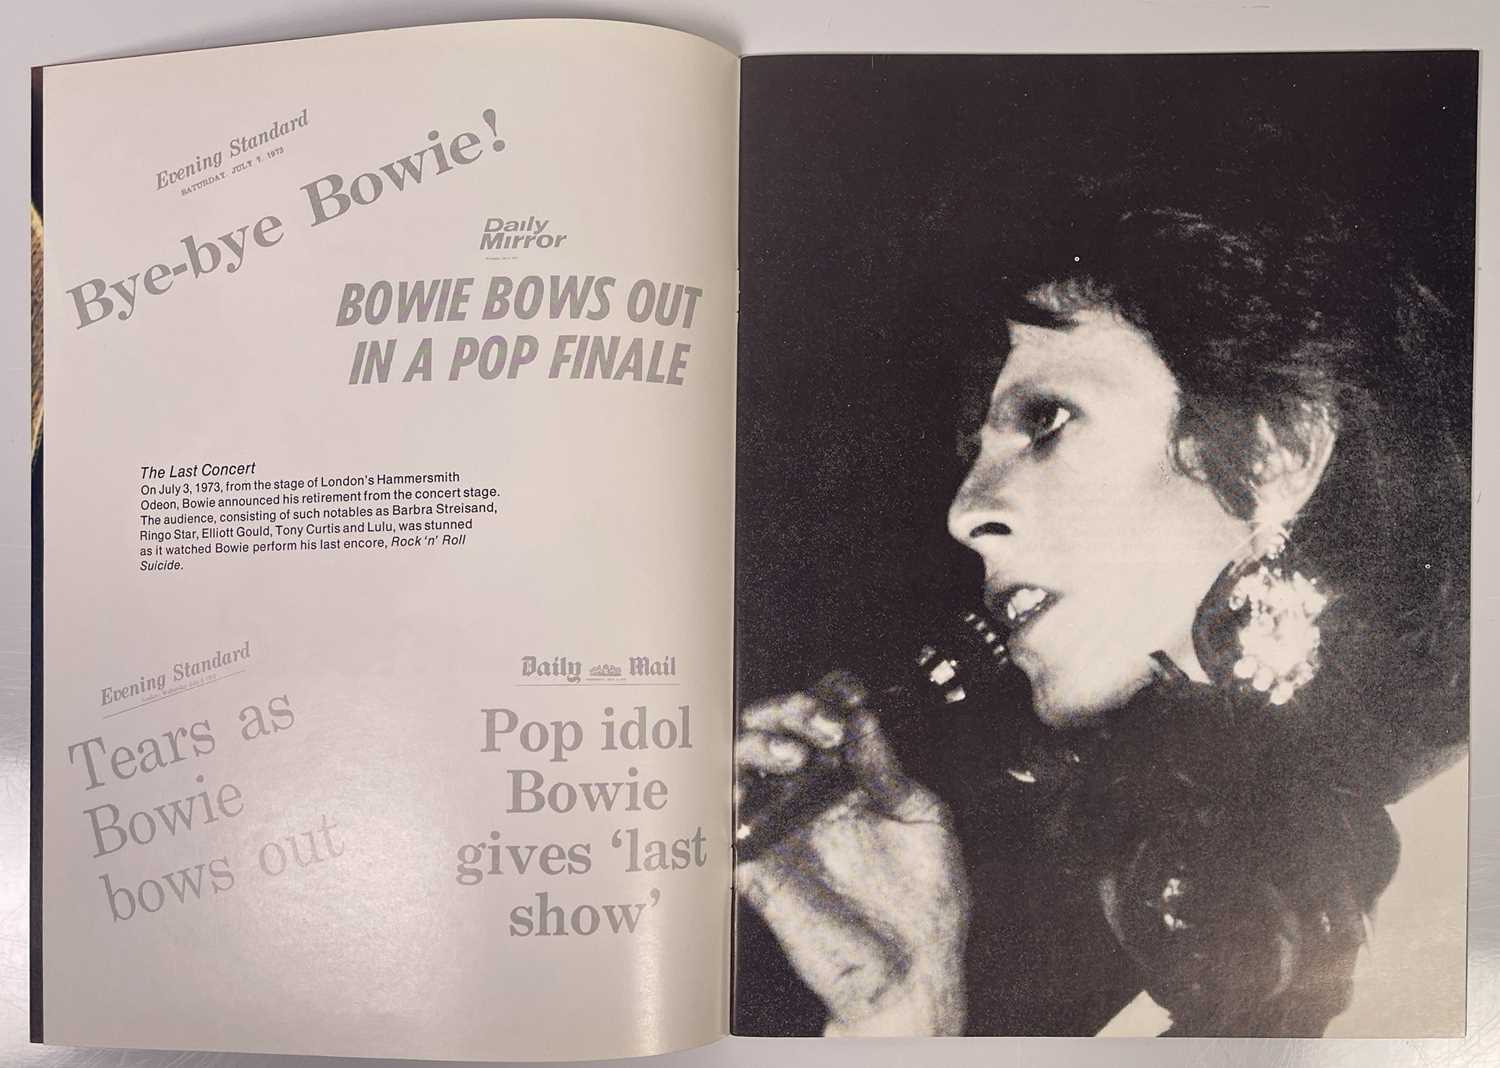 DAVID BOWIE - DIAMOND DOGS US PROGRAMME AND STICKER. - Image 4 of 9